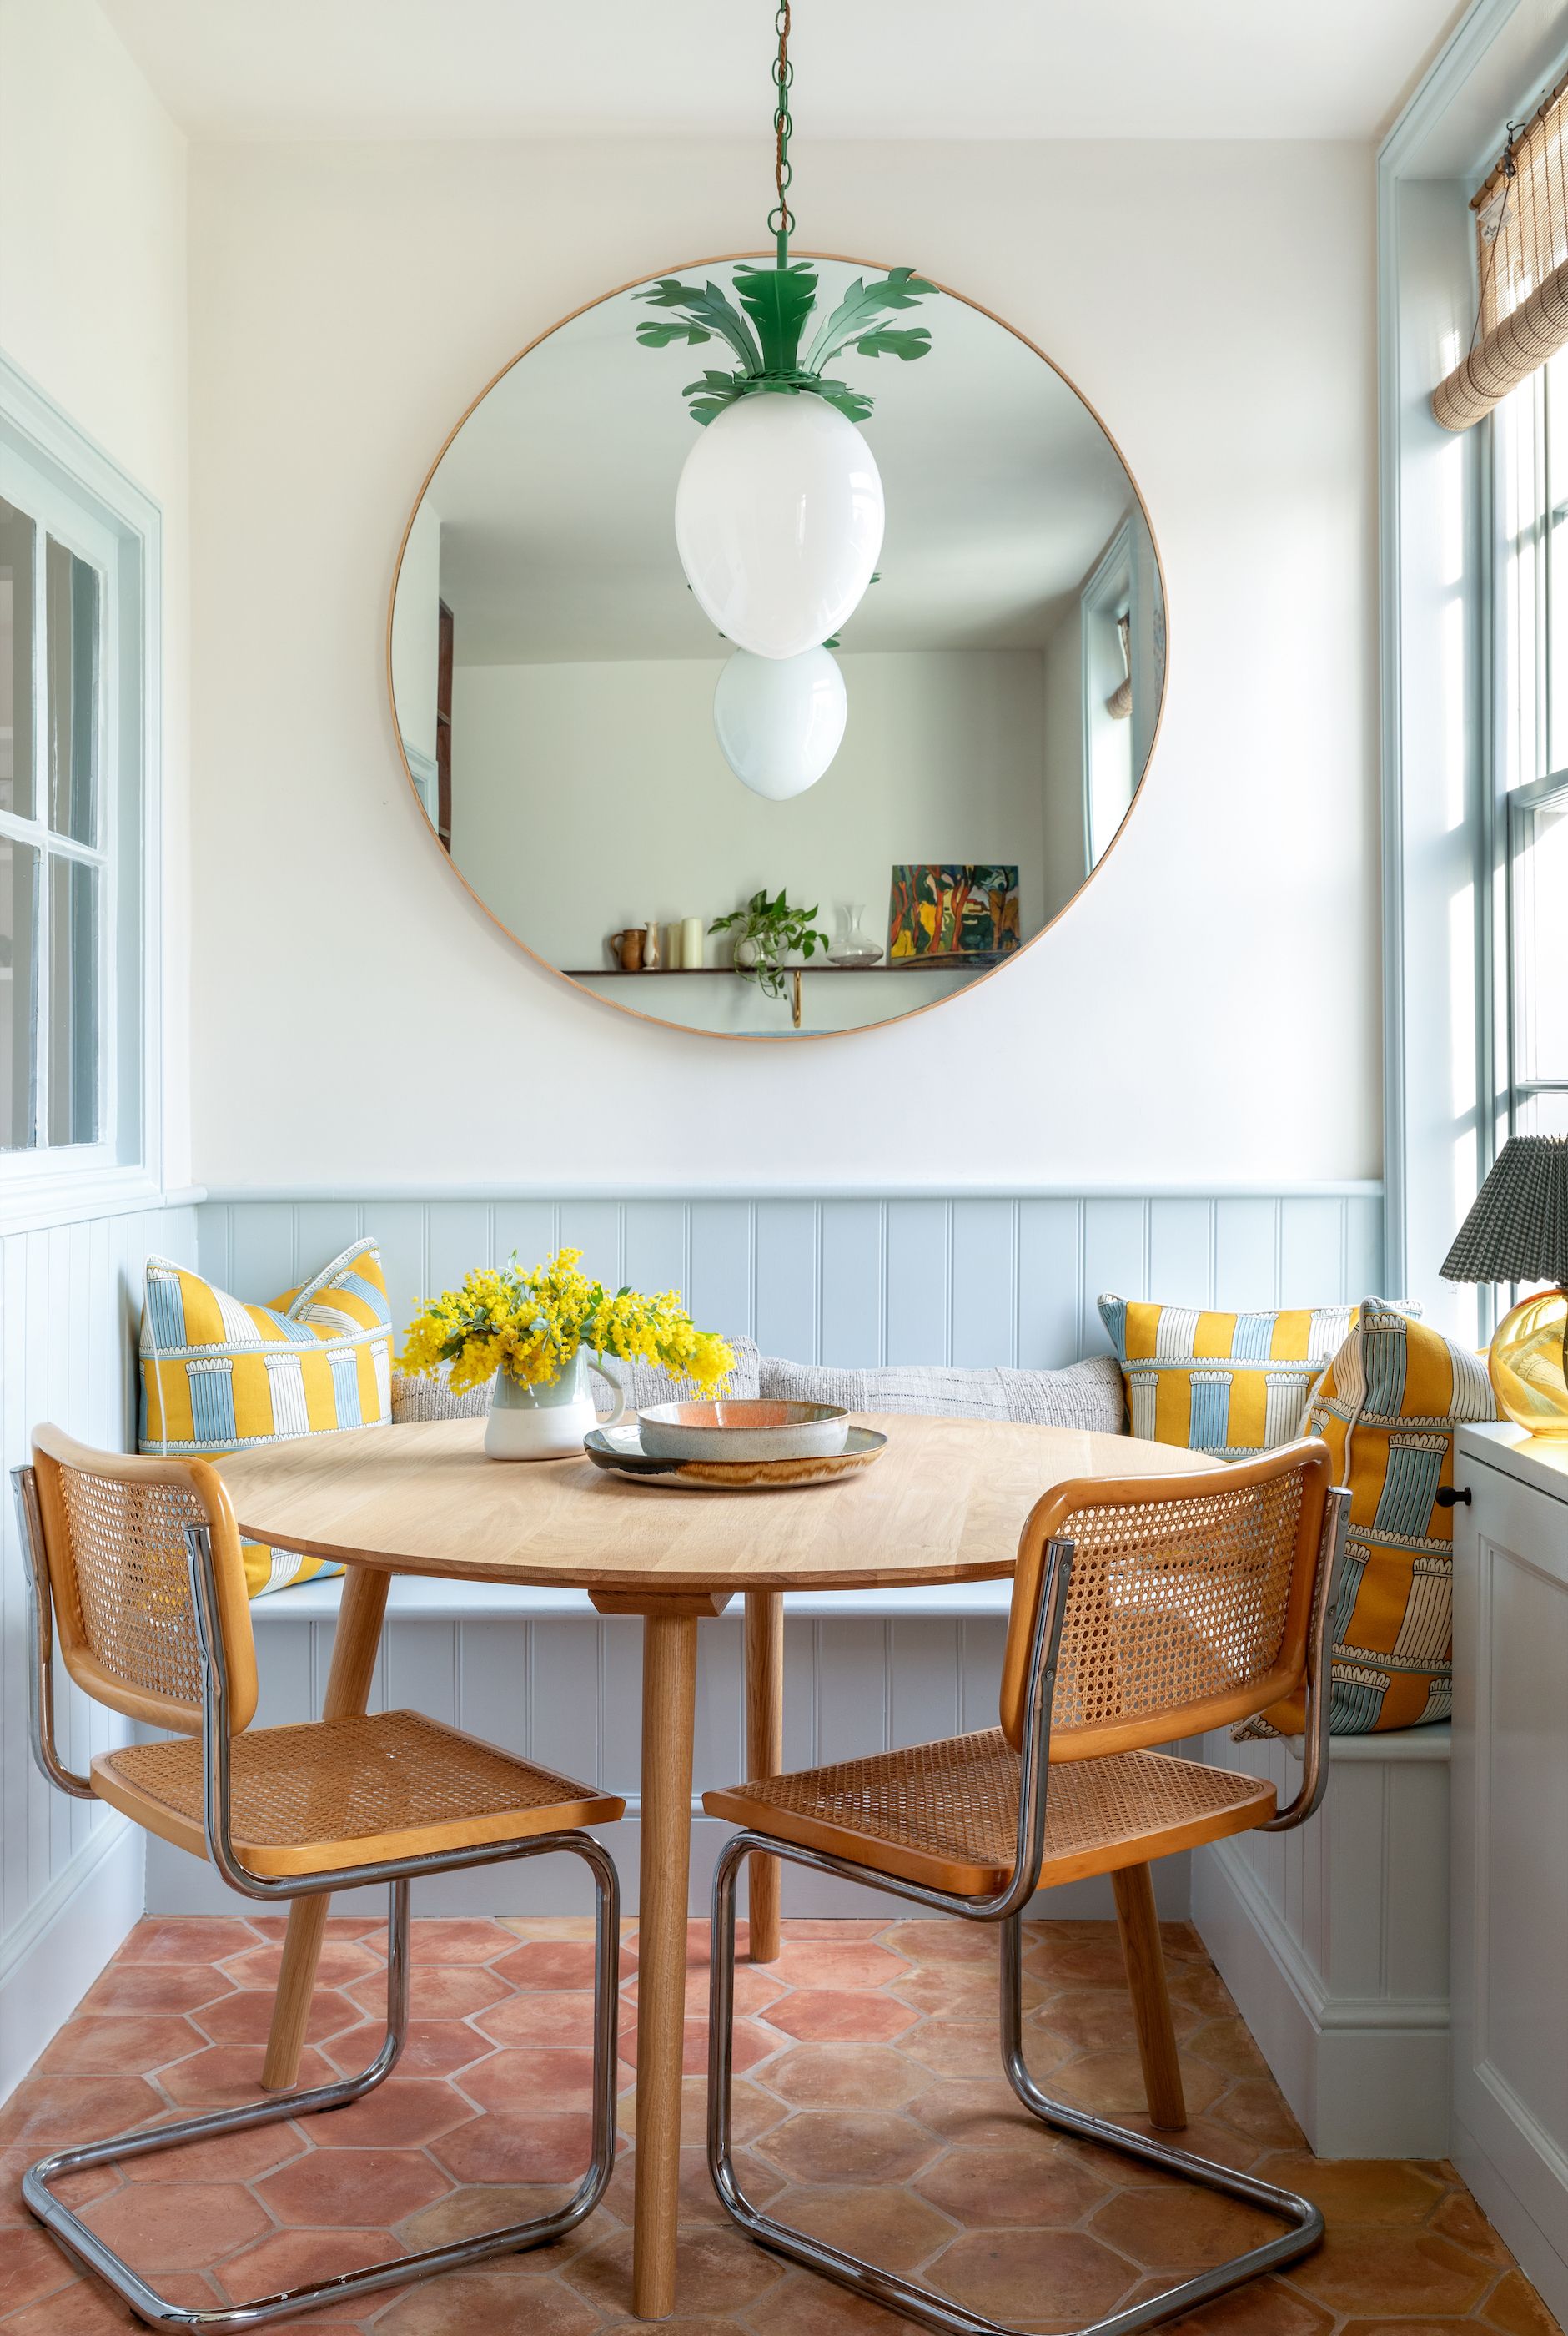 Booth vs. Banquette: What's the Difference?